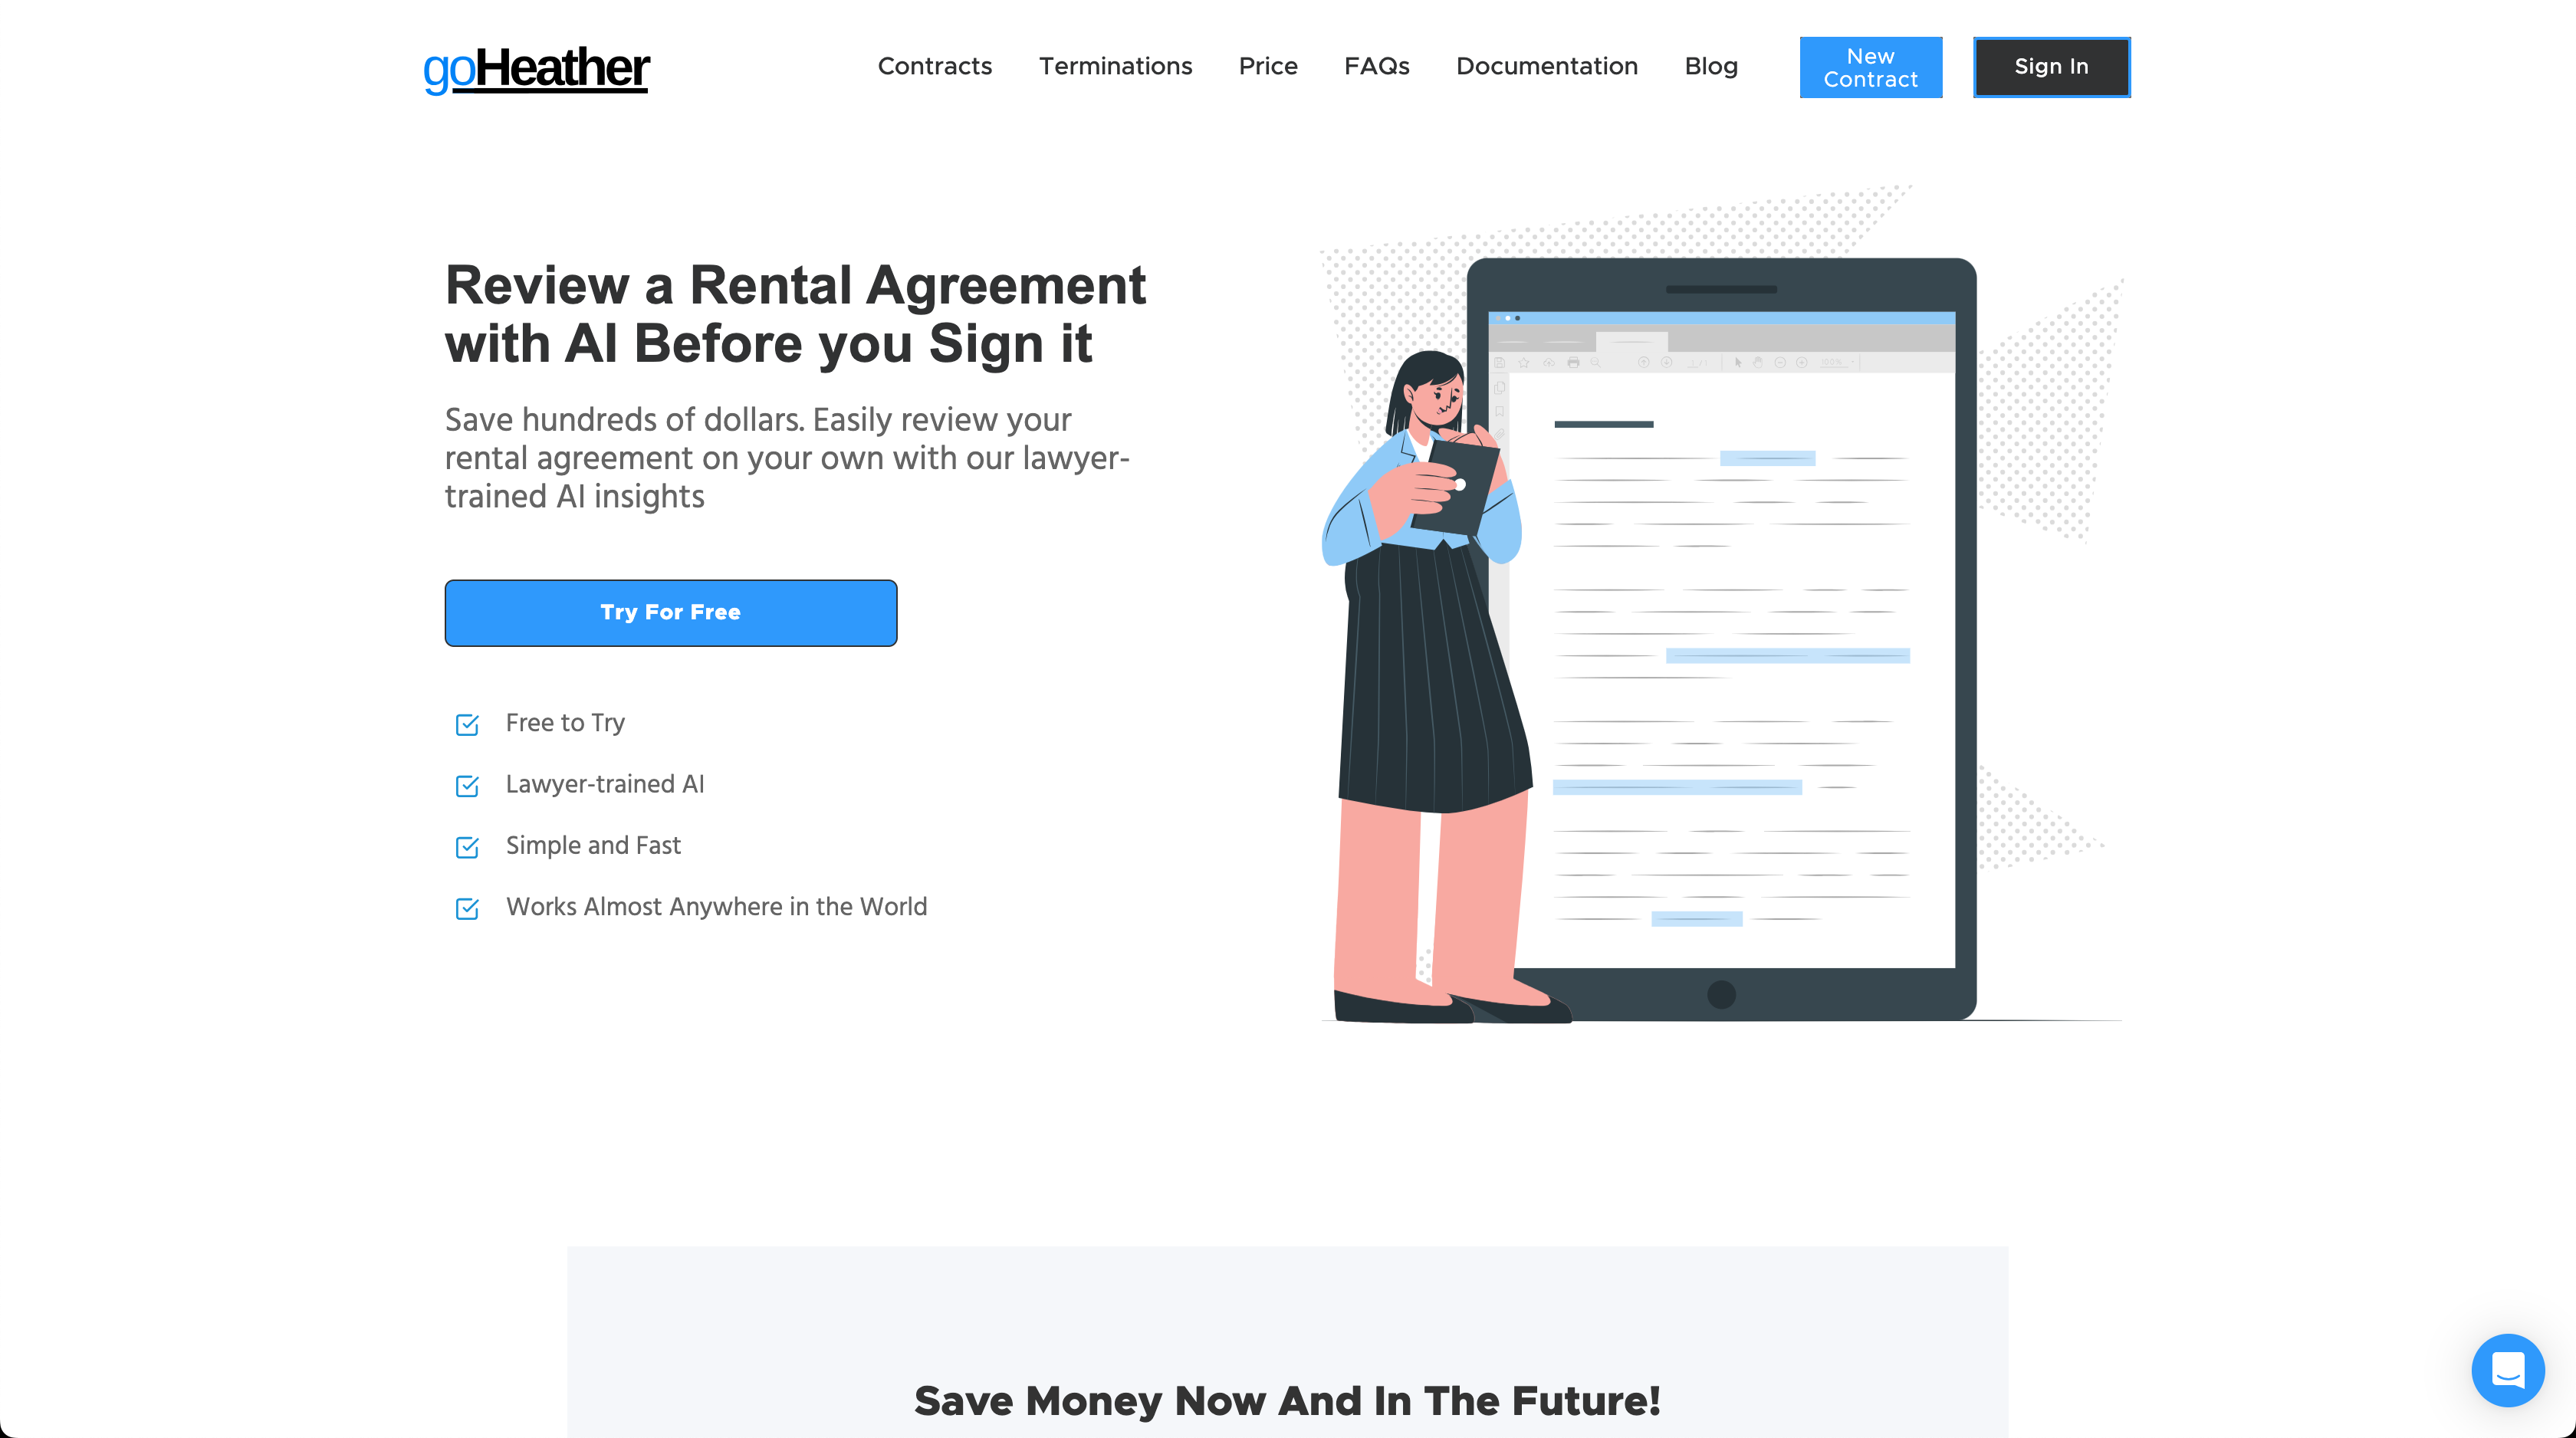 Review a Rental Agreement with AI by goHeather